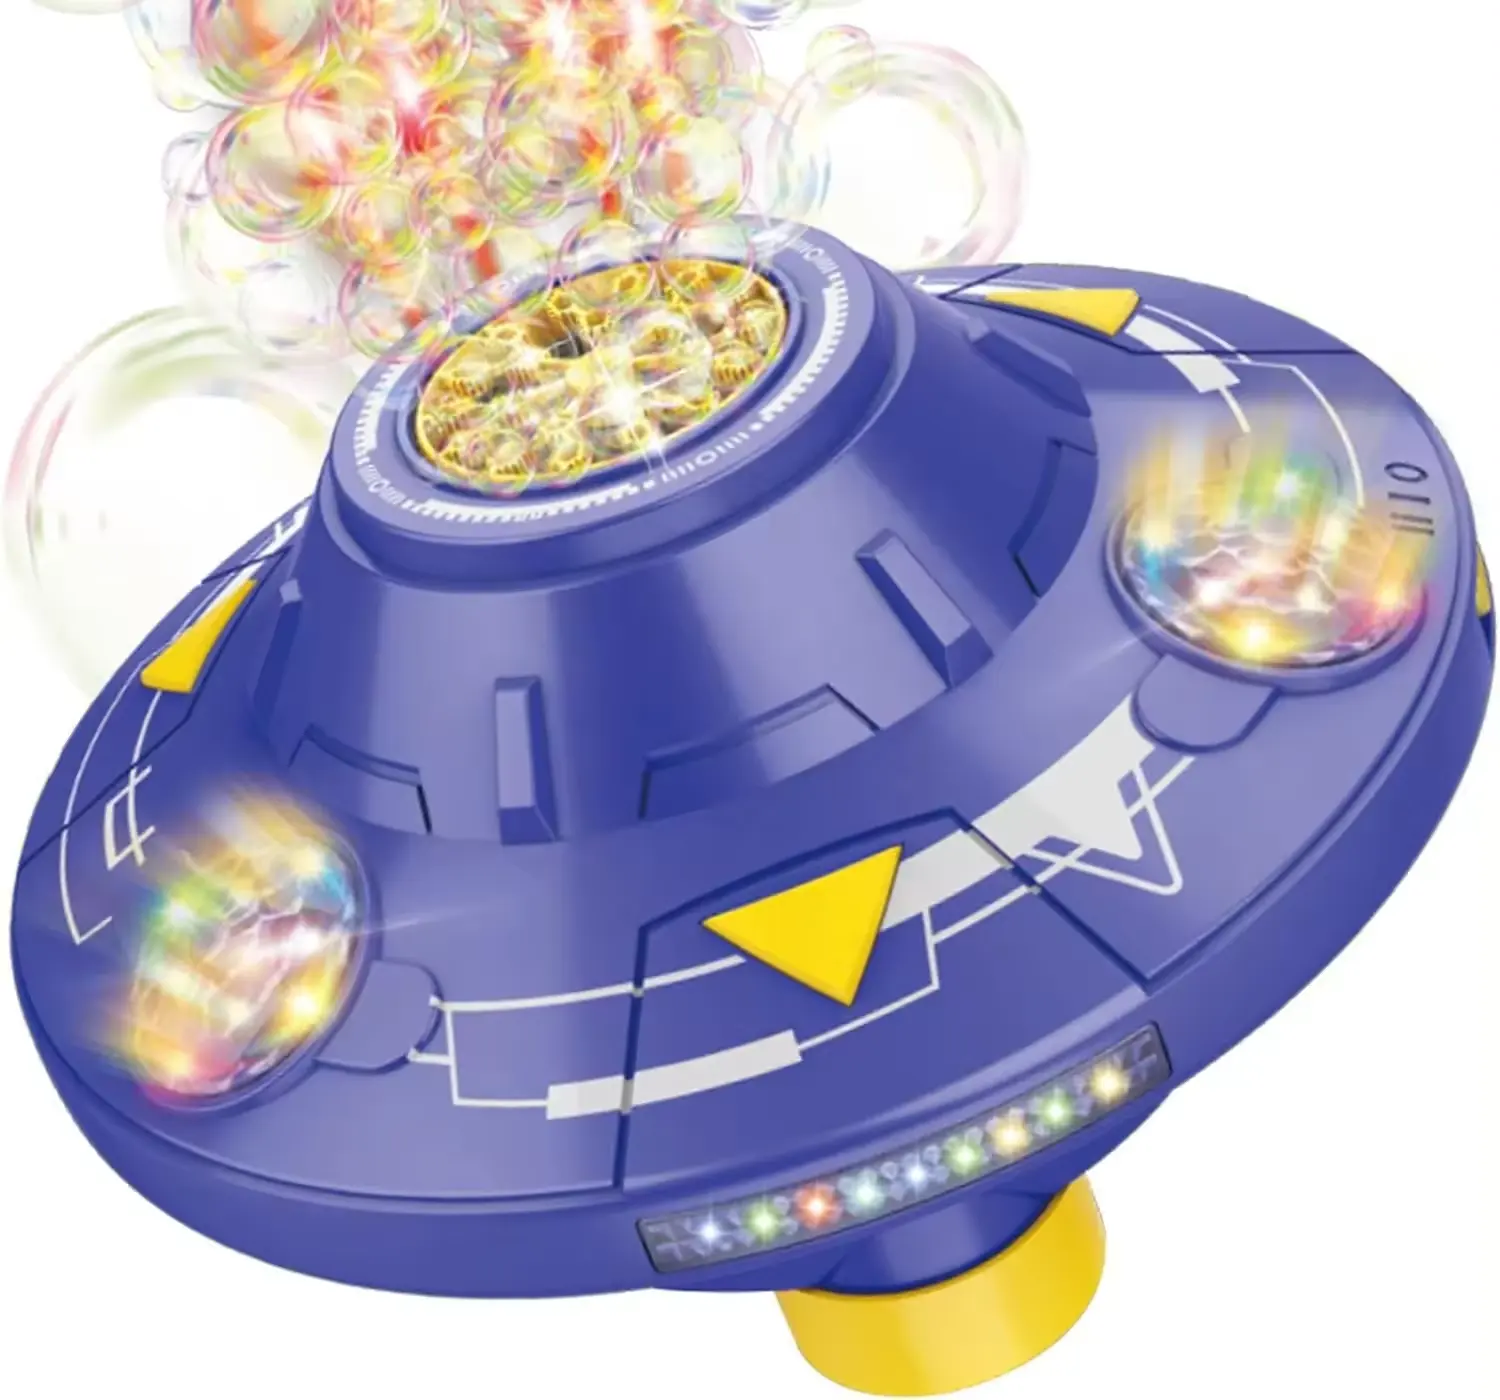 UFO Flying Saucer Bubble Machine Automatic Rotating Bubble Machine toys for Parties Bubble Blower with Obstacle Avoidance